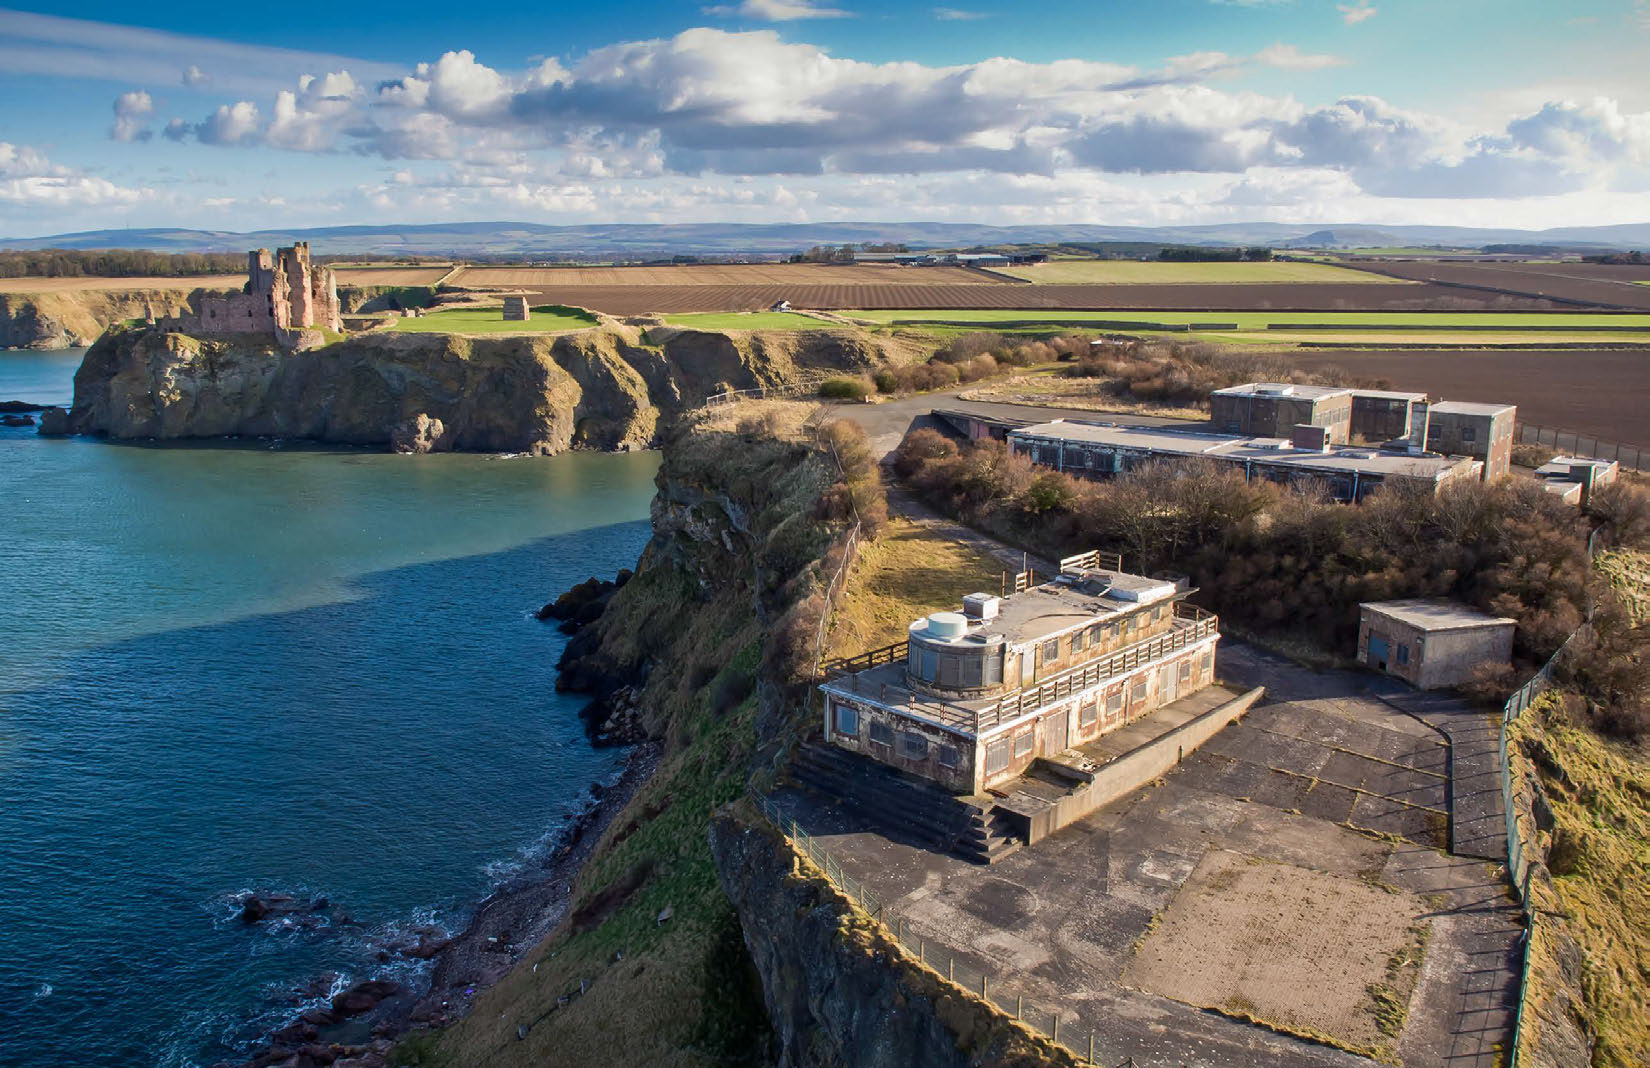 Gin Head WWII naval base was for sale via Domus Nova. It has planning permission and designs for two sunken villas to replace the existing structures on the site as a giant adaptive reuse project